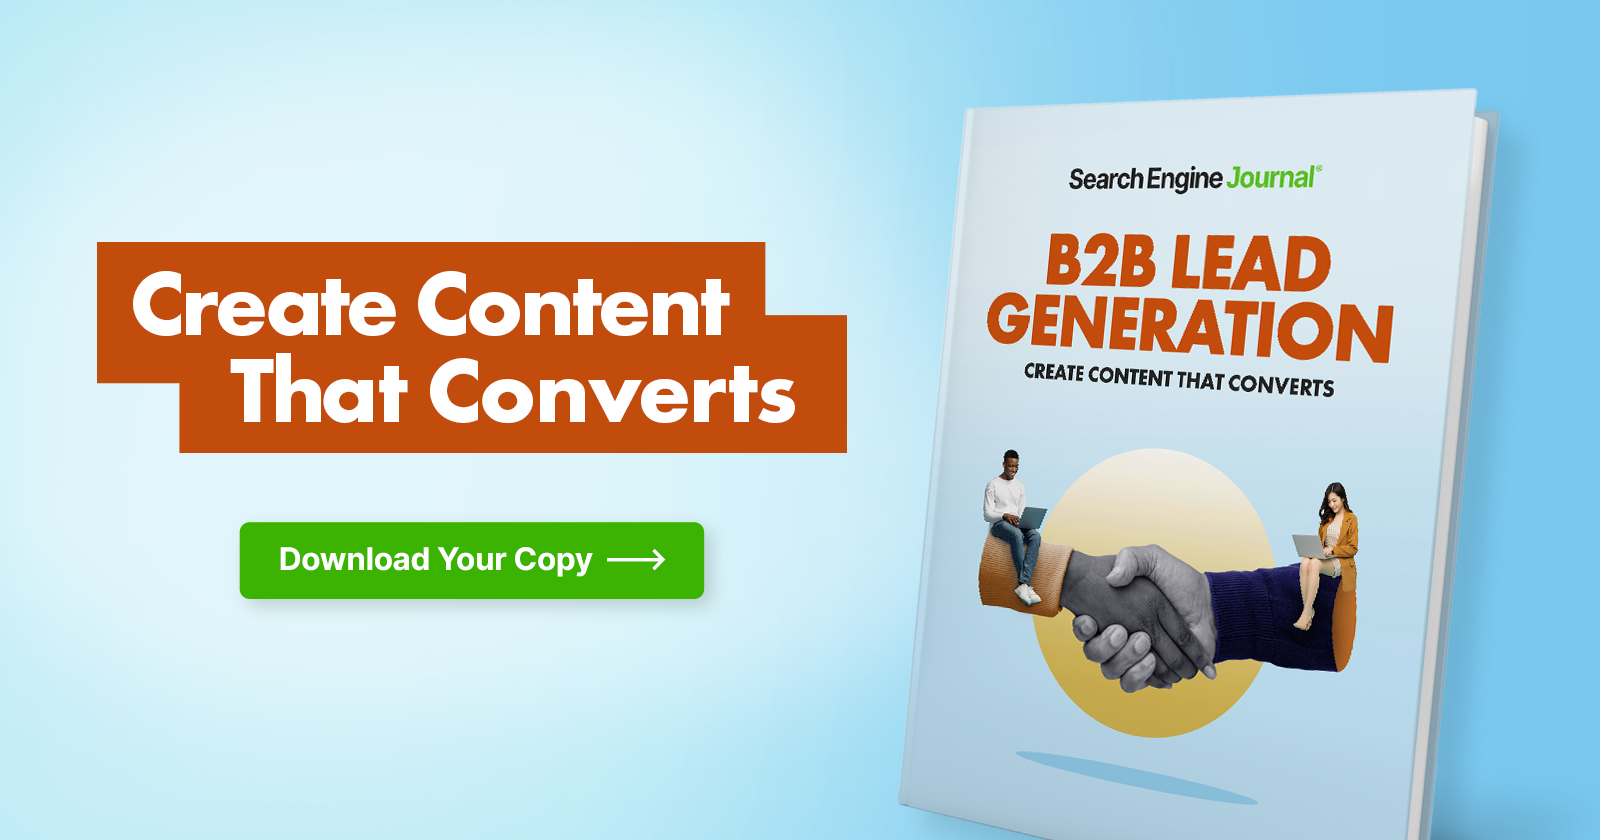 B2B lead generation: Create content that converts 